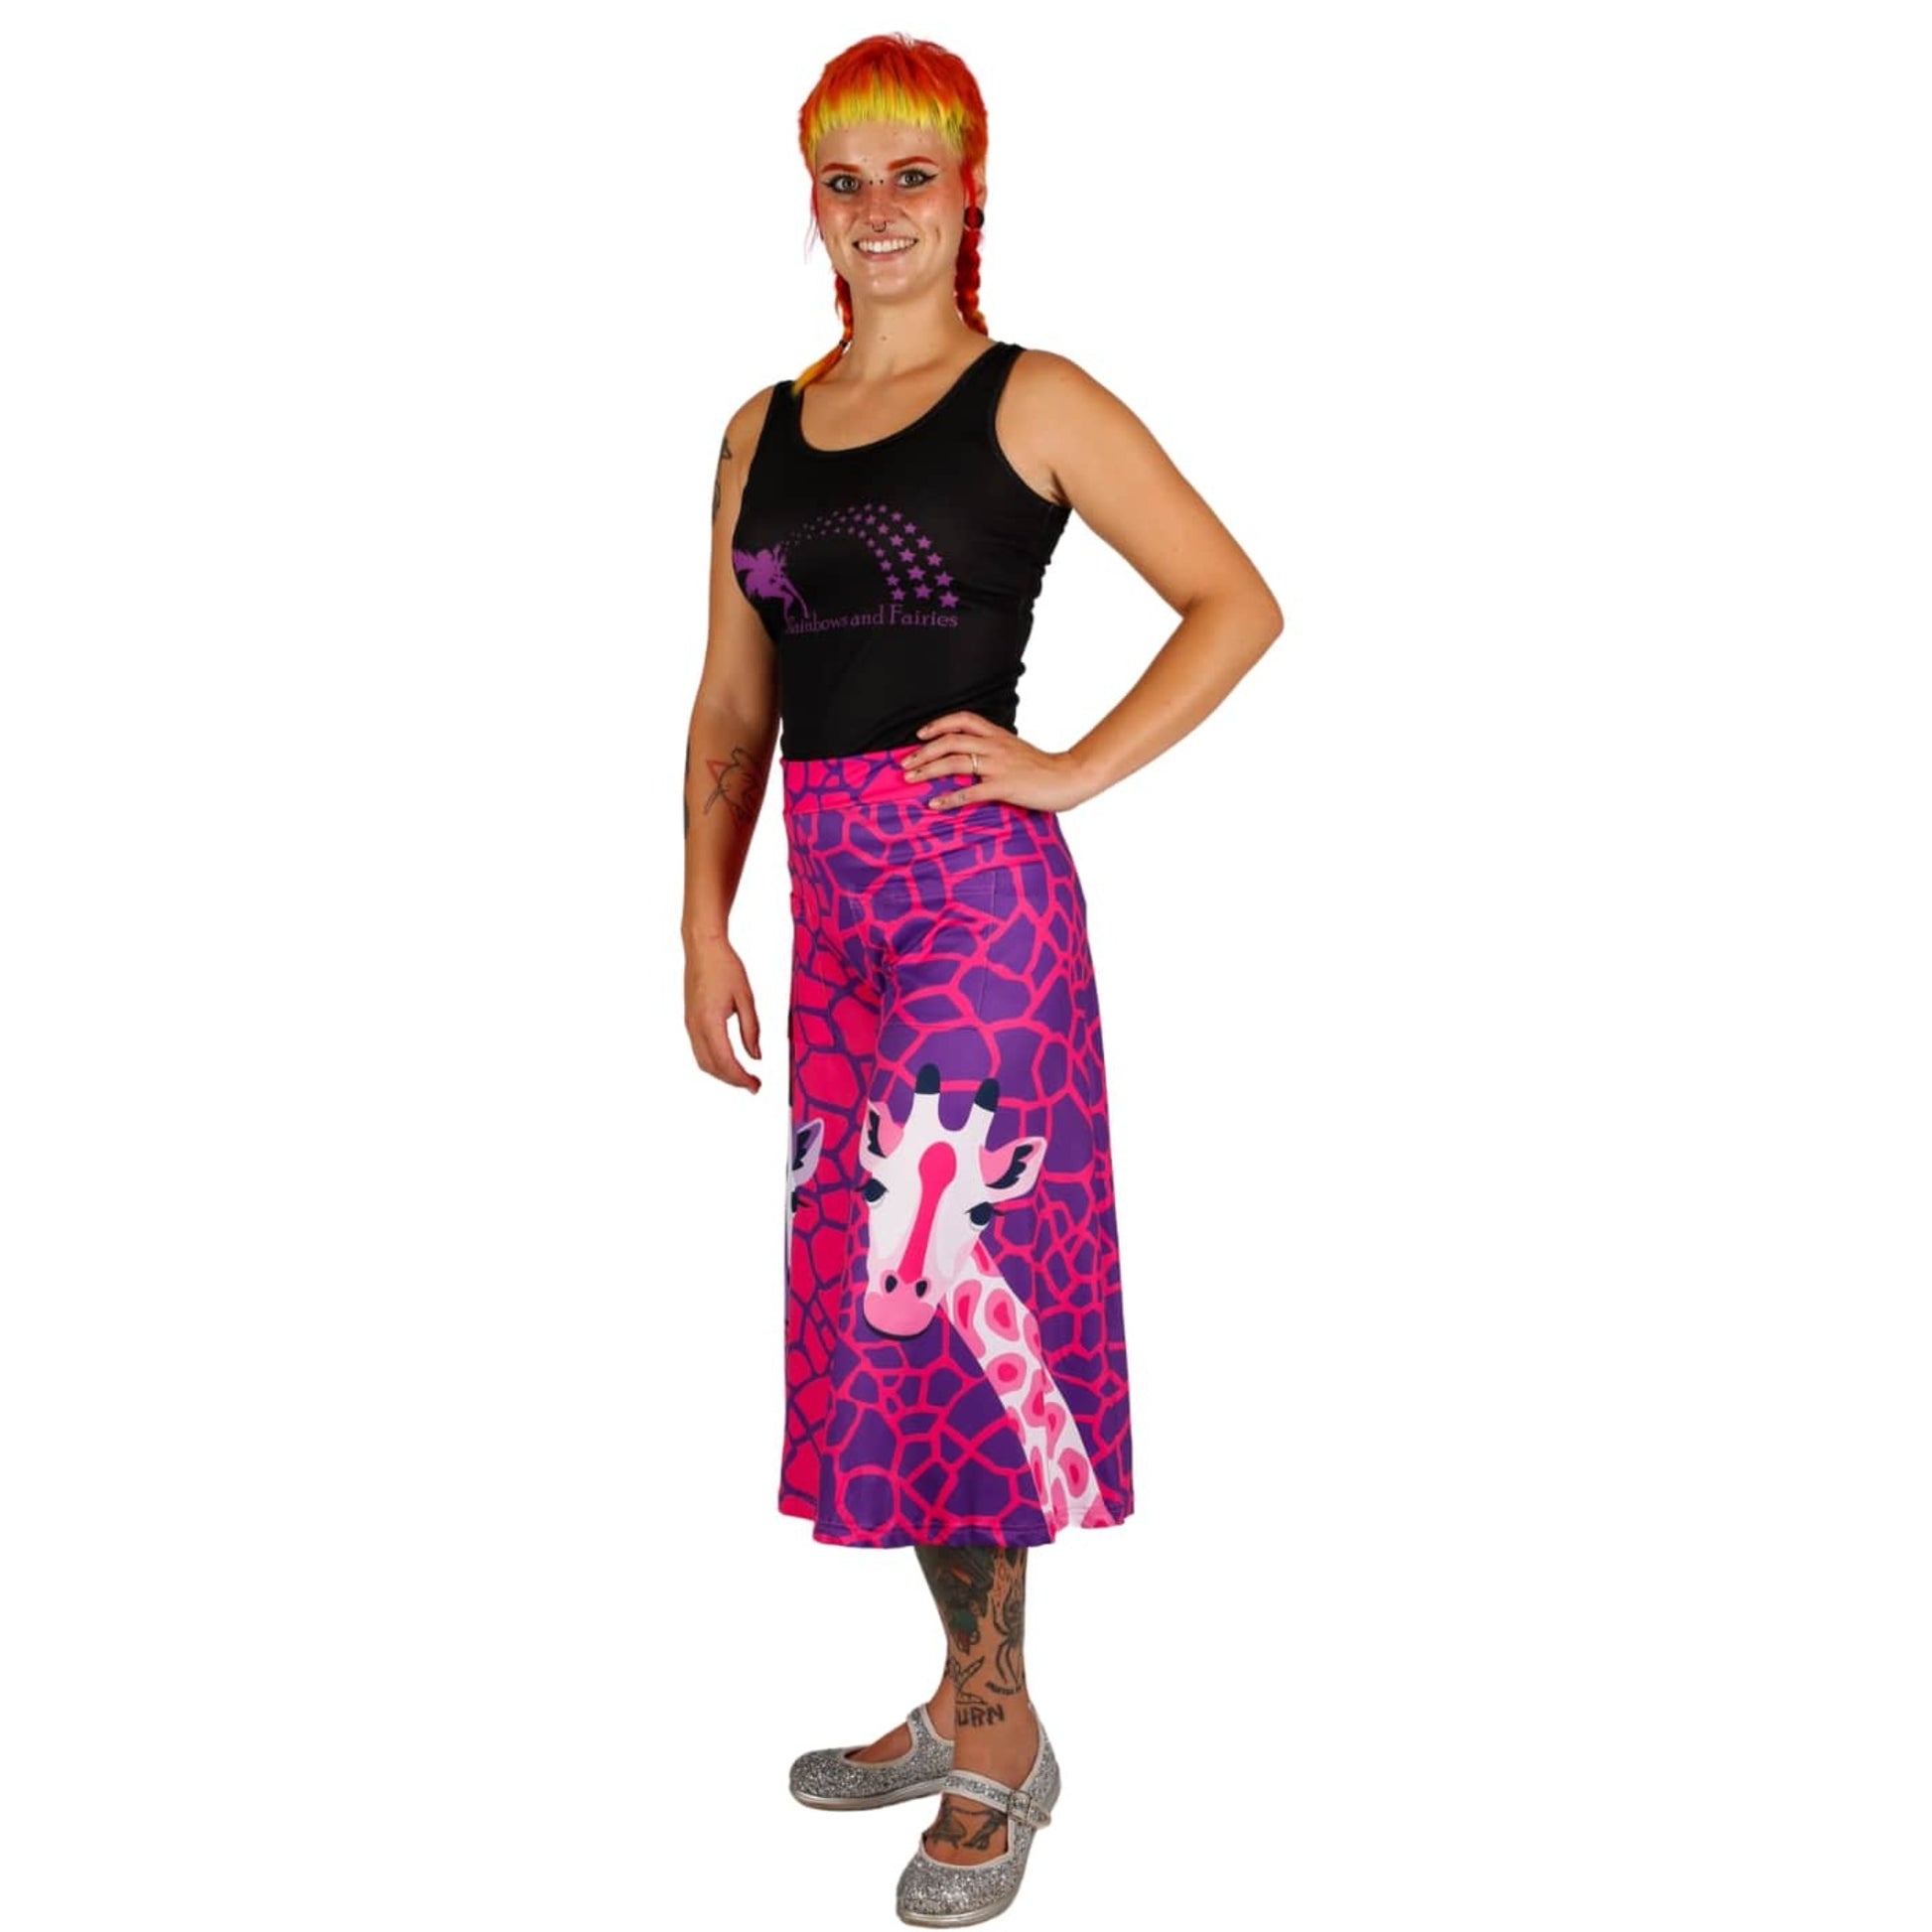 Andy Culottes by RainbowsAndFairies.com (Giraffe - Pink & Purple - Jungle - 3 Quarter Pants - Rockabilly - Vintage Inspired) - SKU: CL_CULTS_ANDYG_PNK - Pic 03